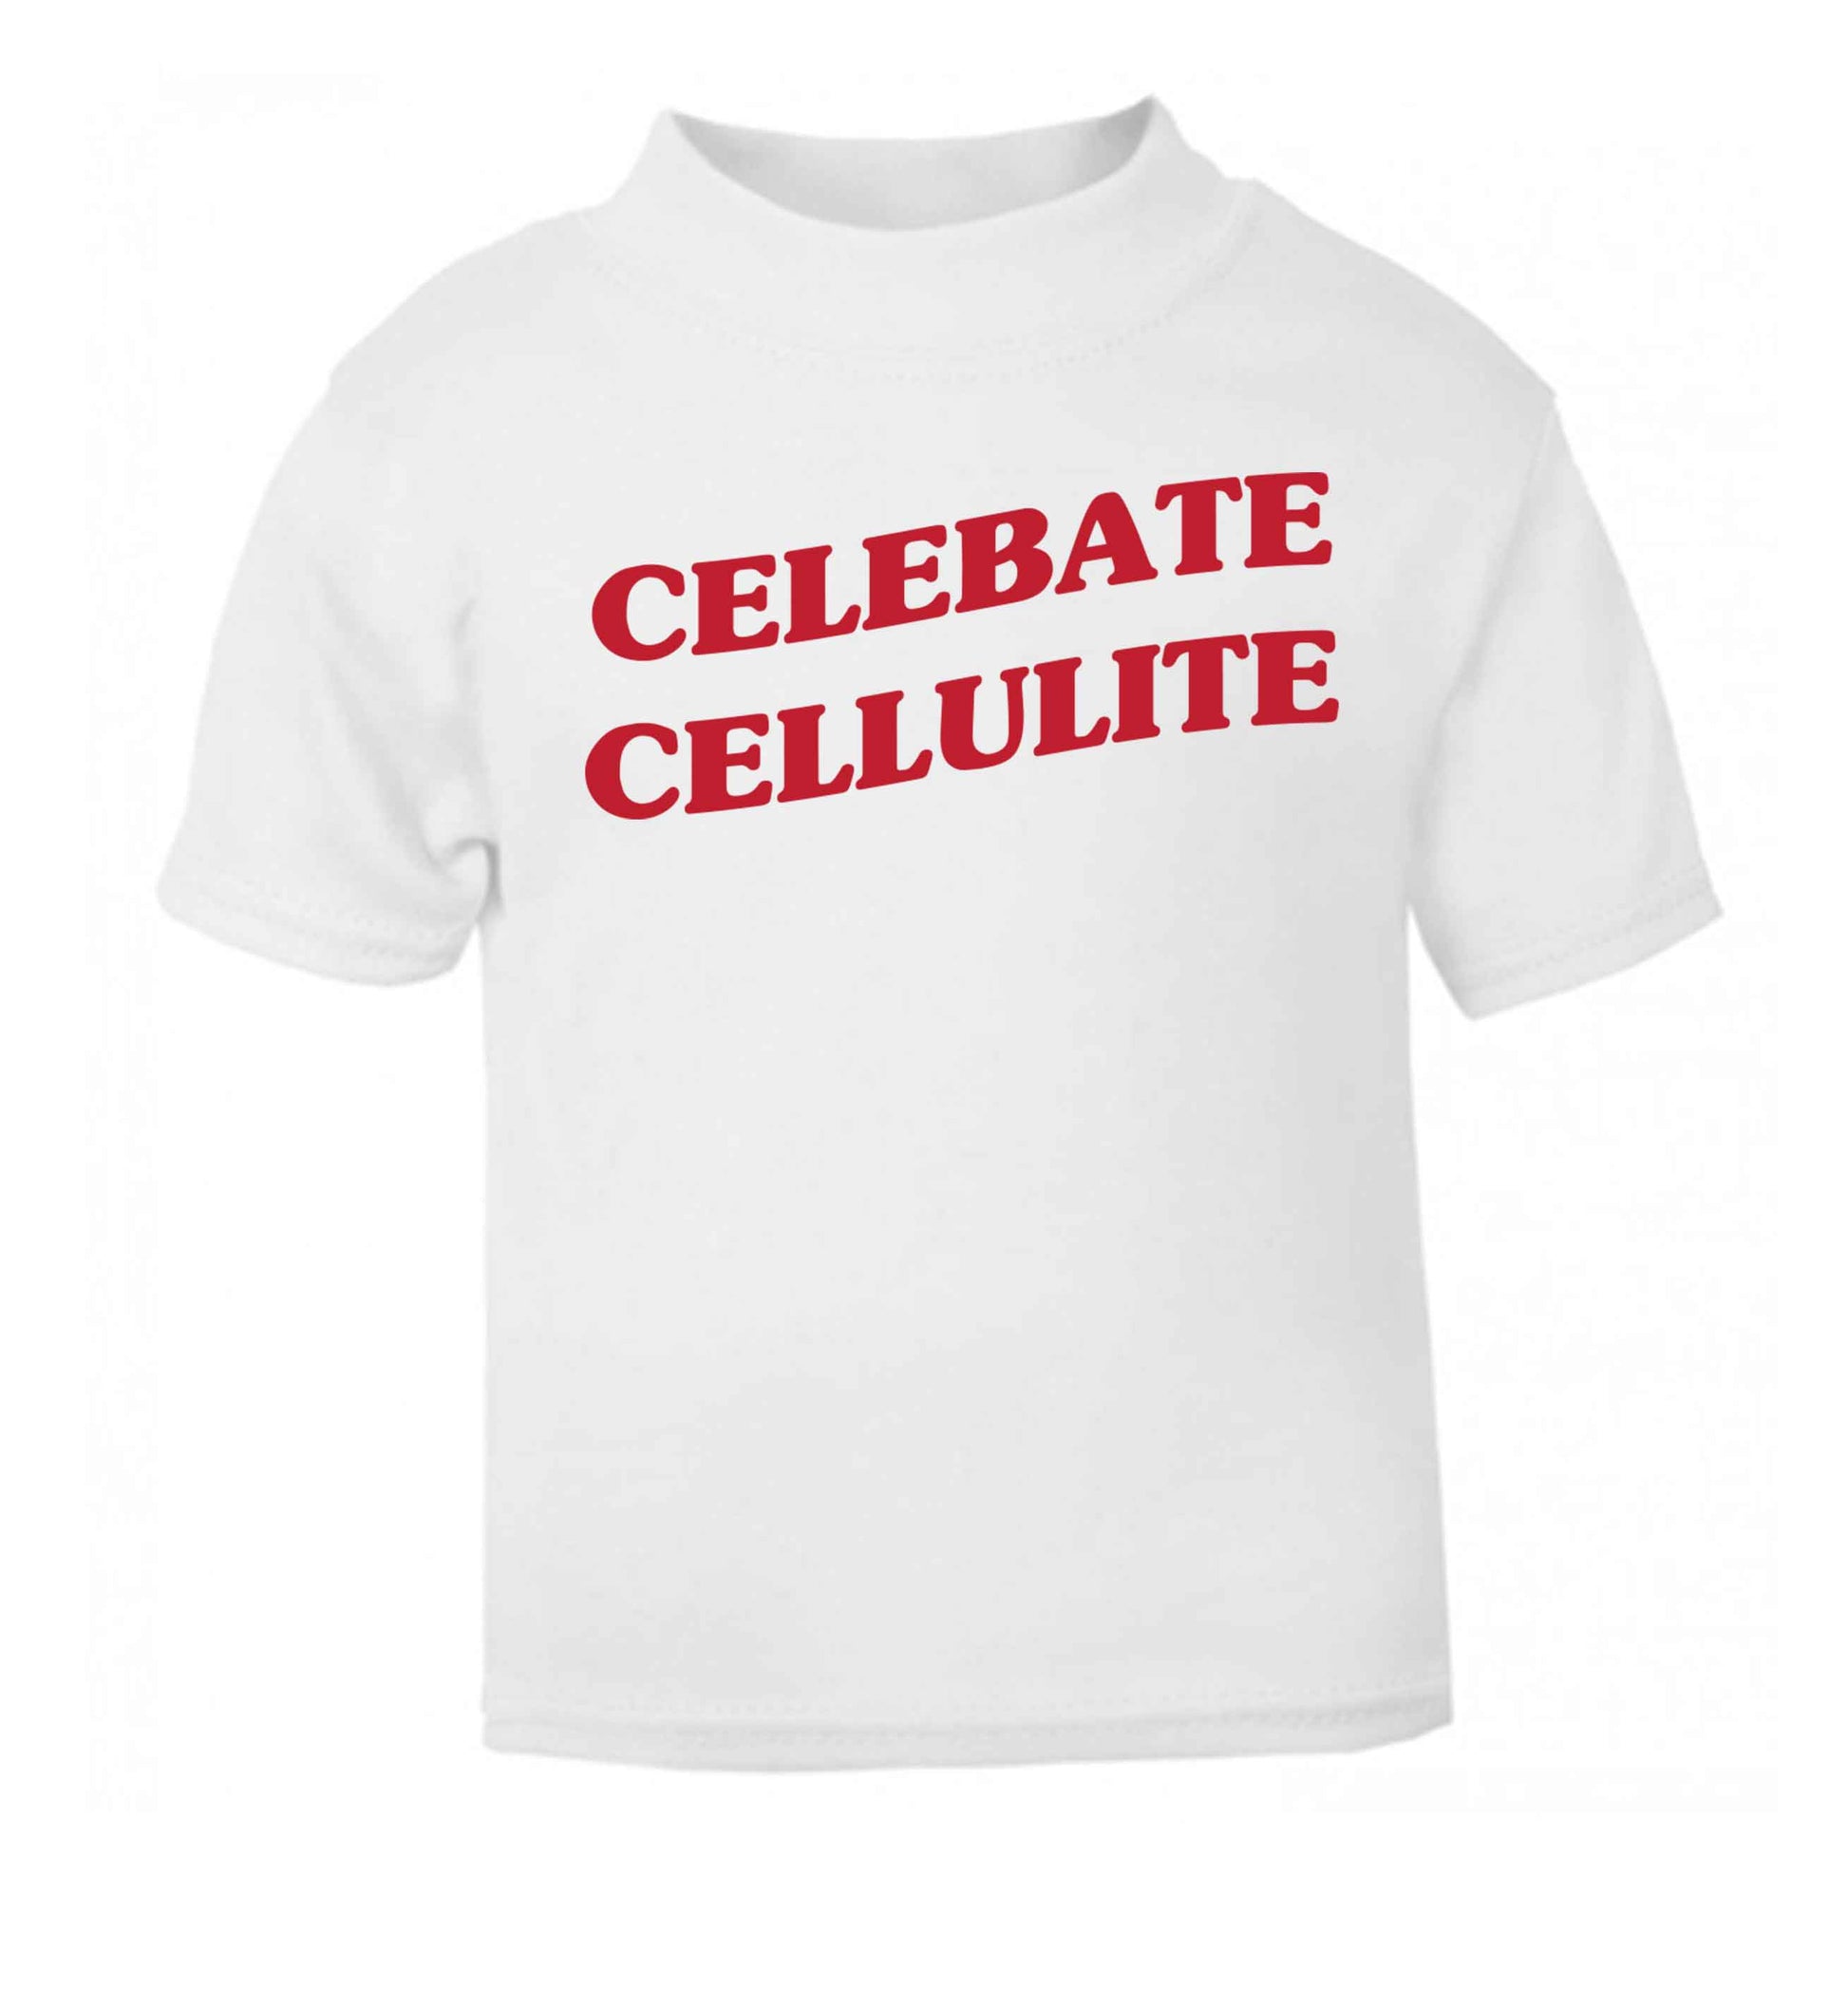 Celebrate cellulite white baby toddler Tshirt 2 Years